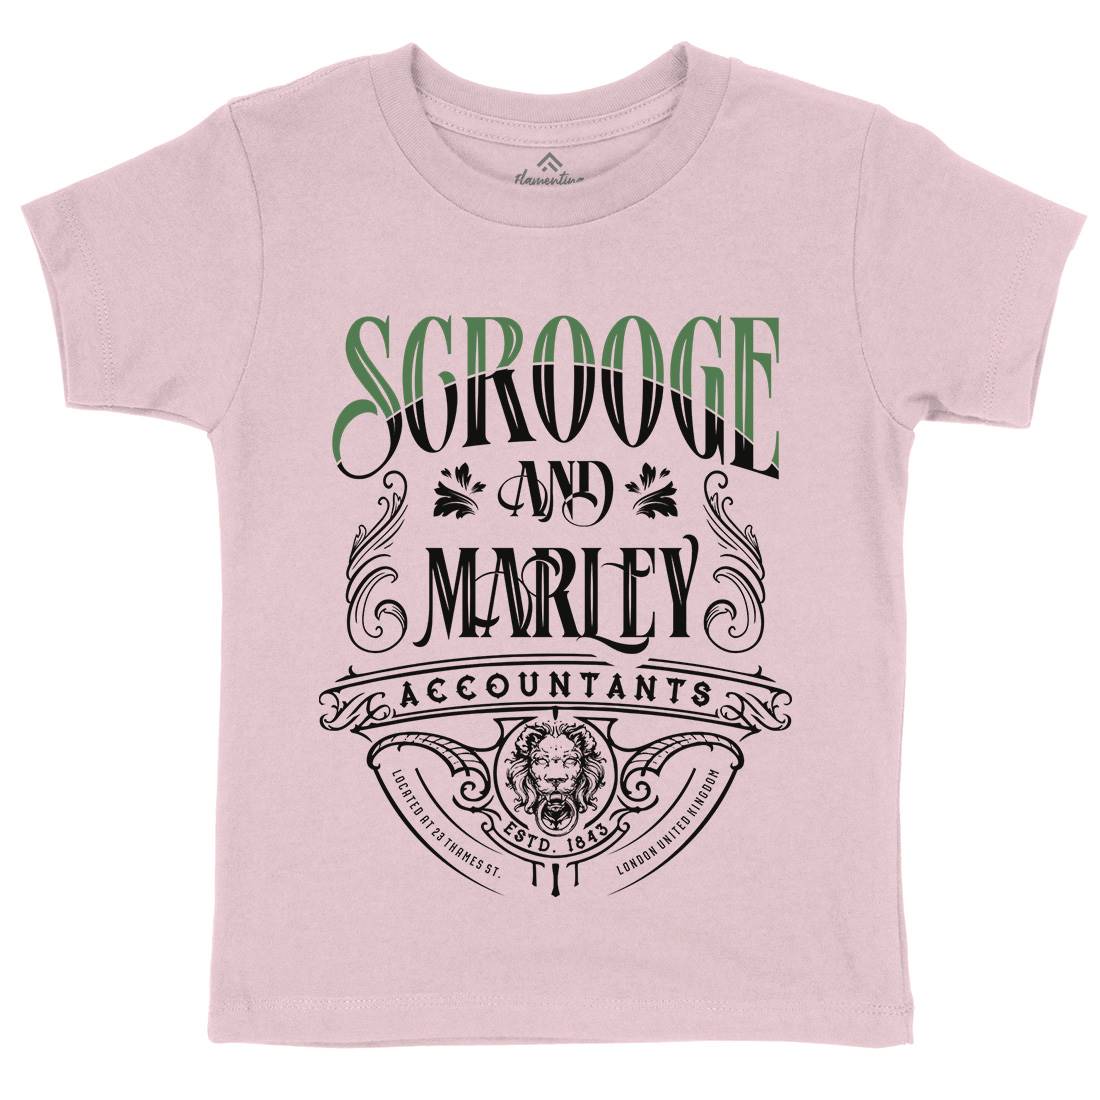 Scrooge And Marley Kids Crew Neck T-Shirt Christmas D100